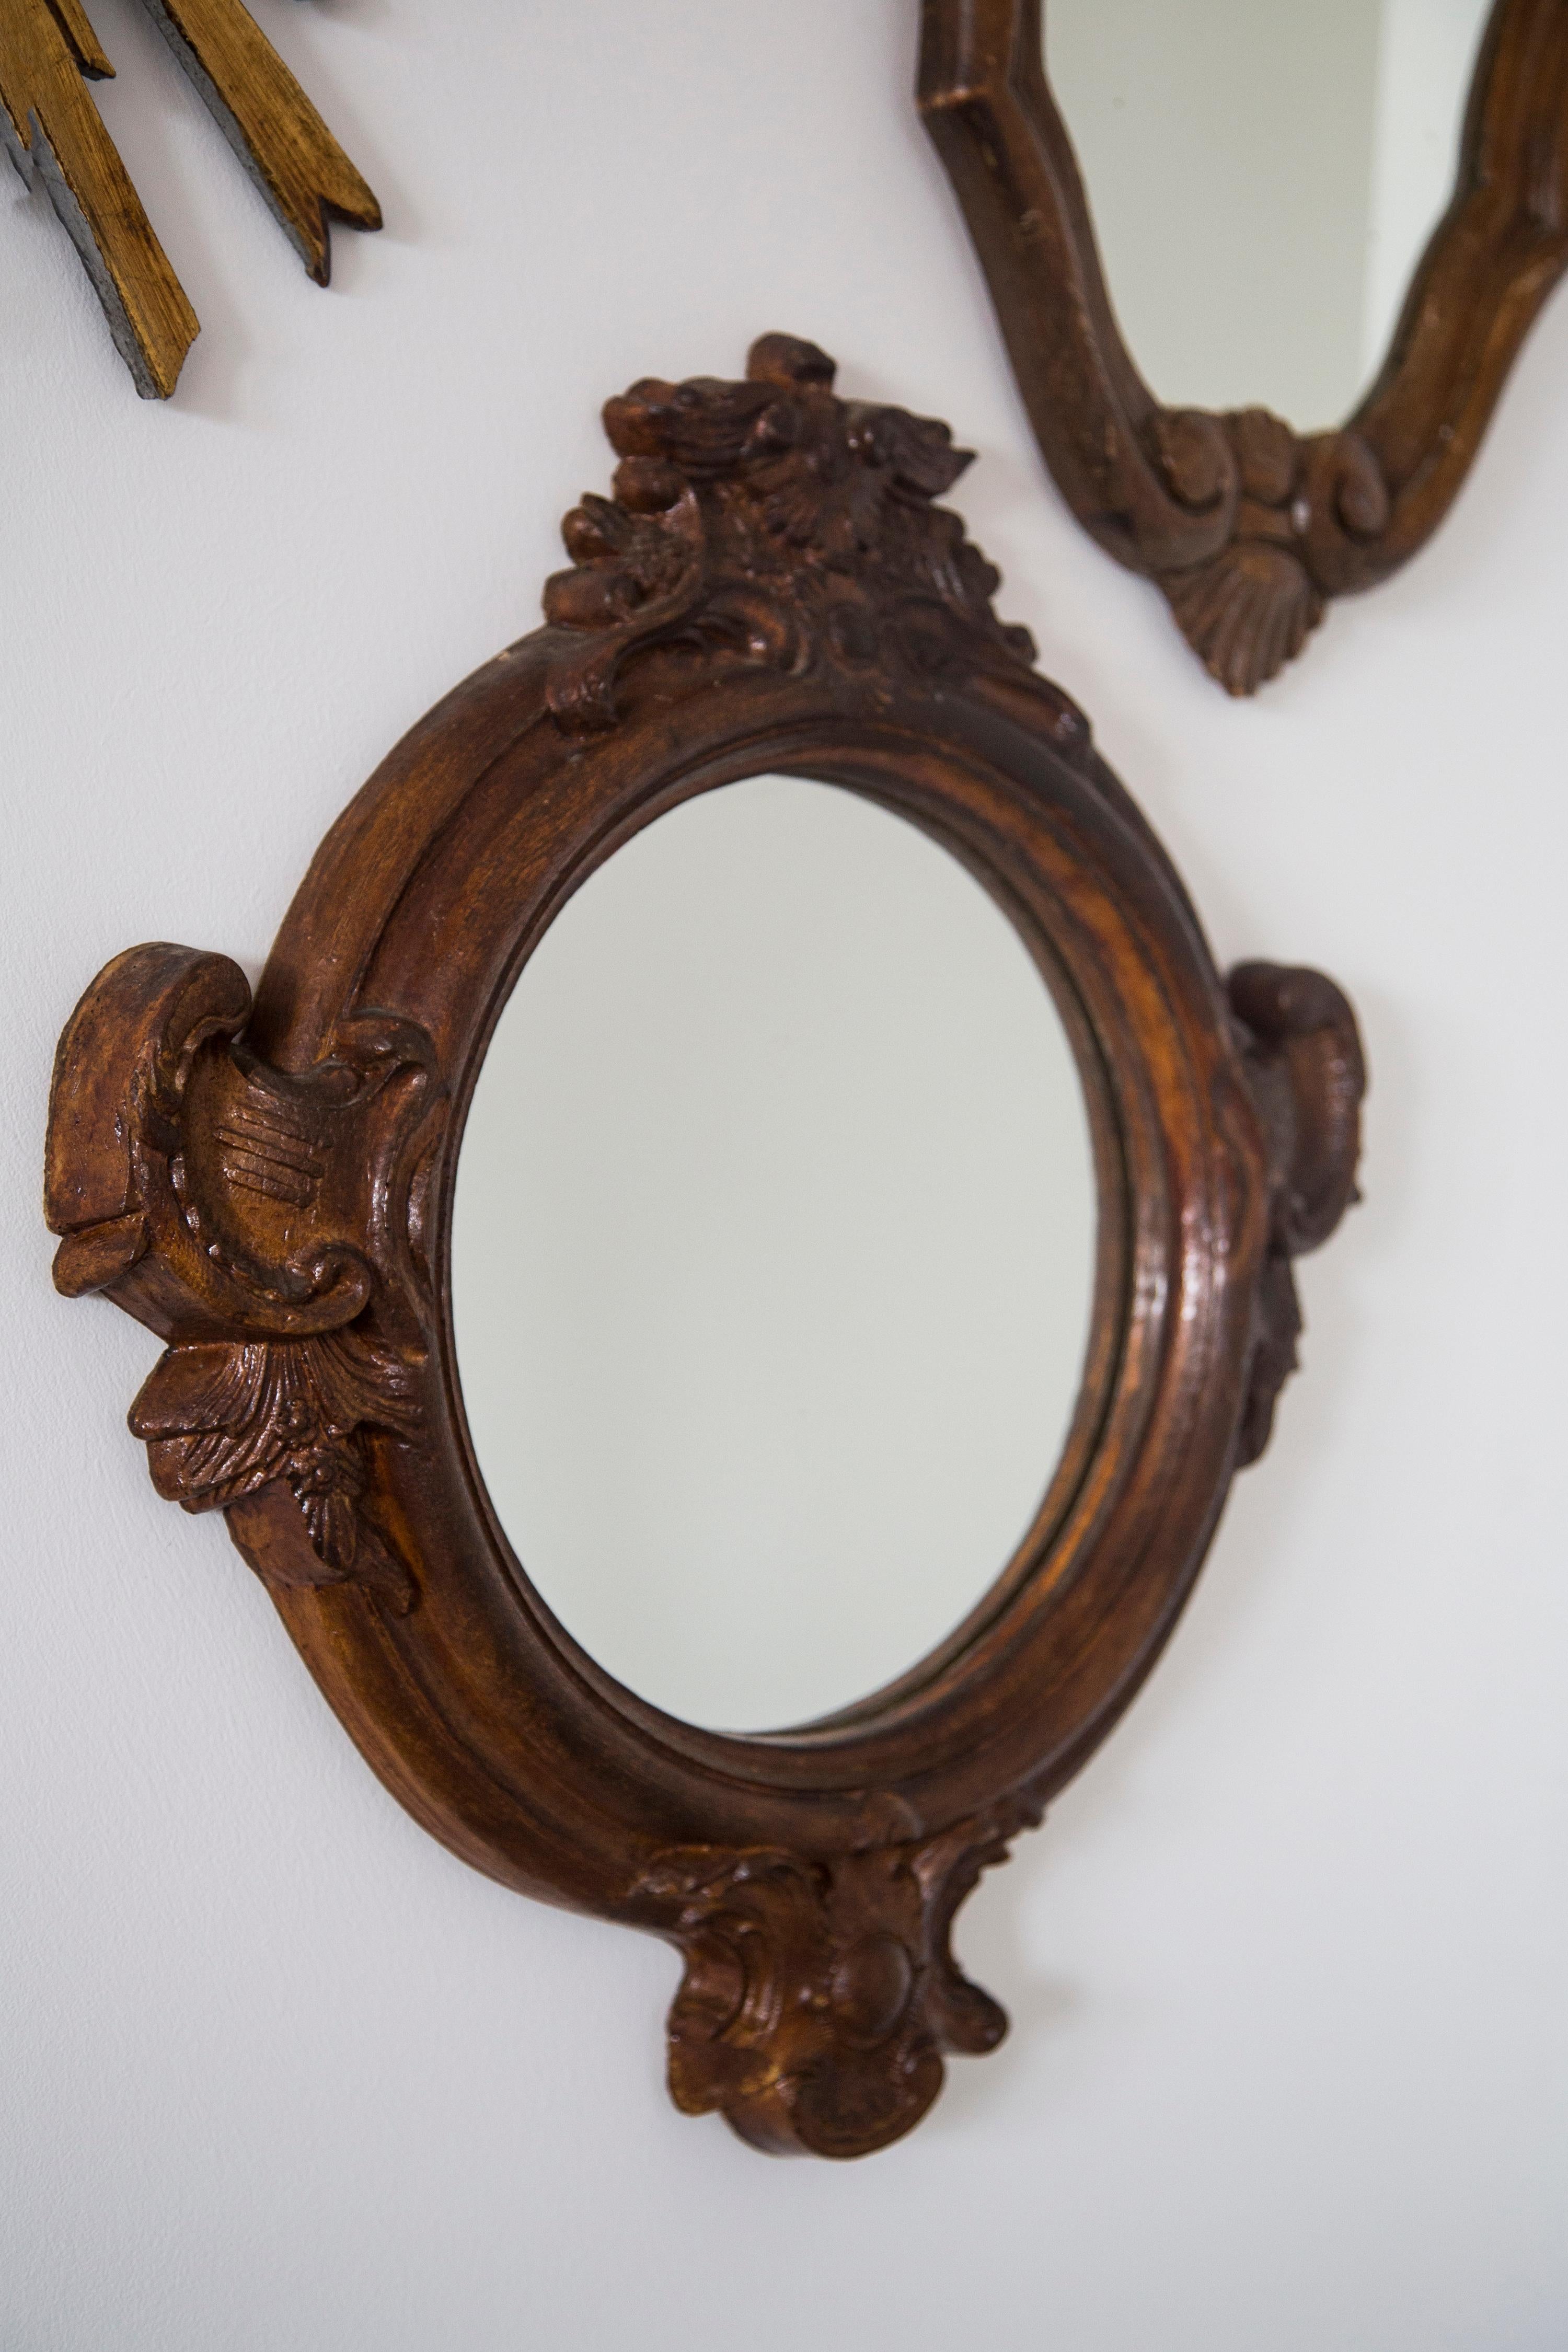 Beautiful mirror in a brown decorative frame from Europe. The frame is made of polywood. Mirror is in very good vintage condition. Original glass. 
Beautiful piece for every interior! Only one unique piece.